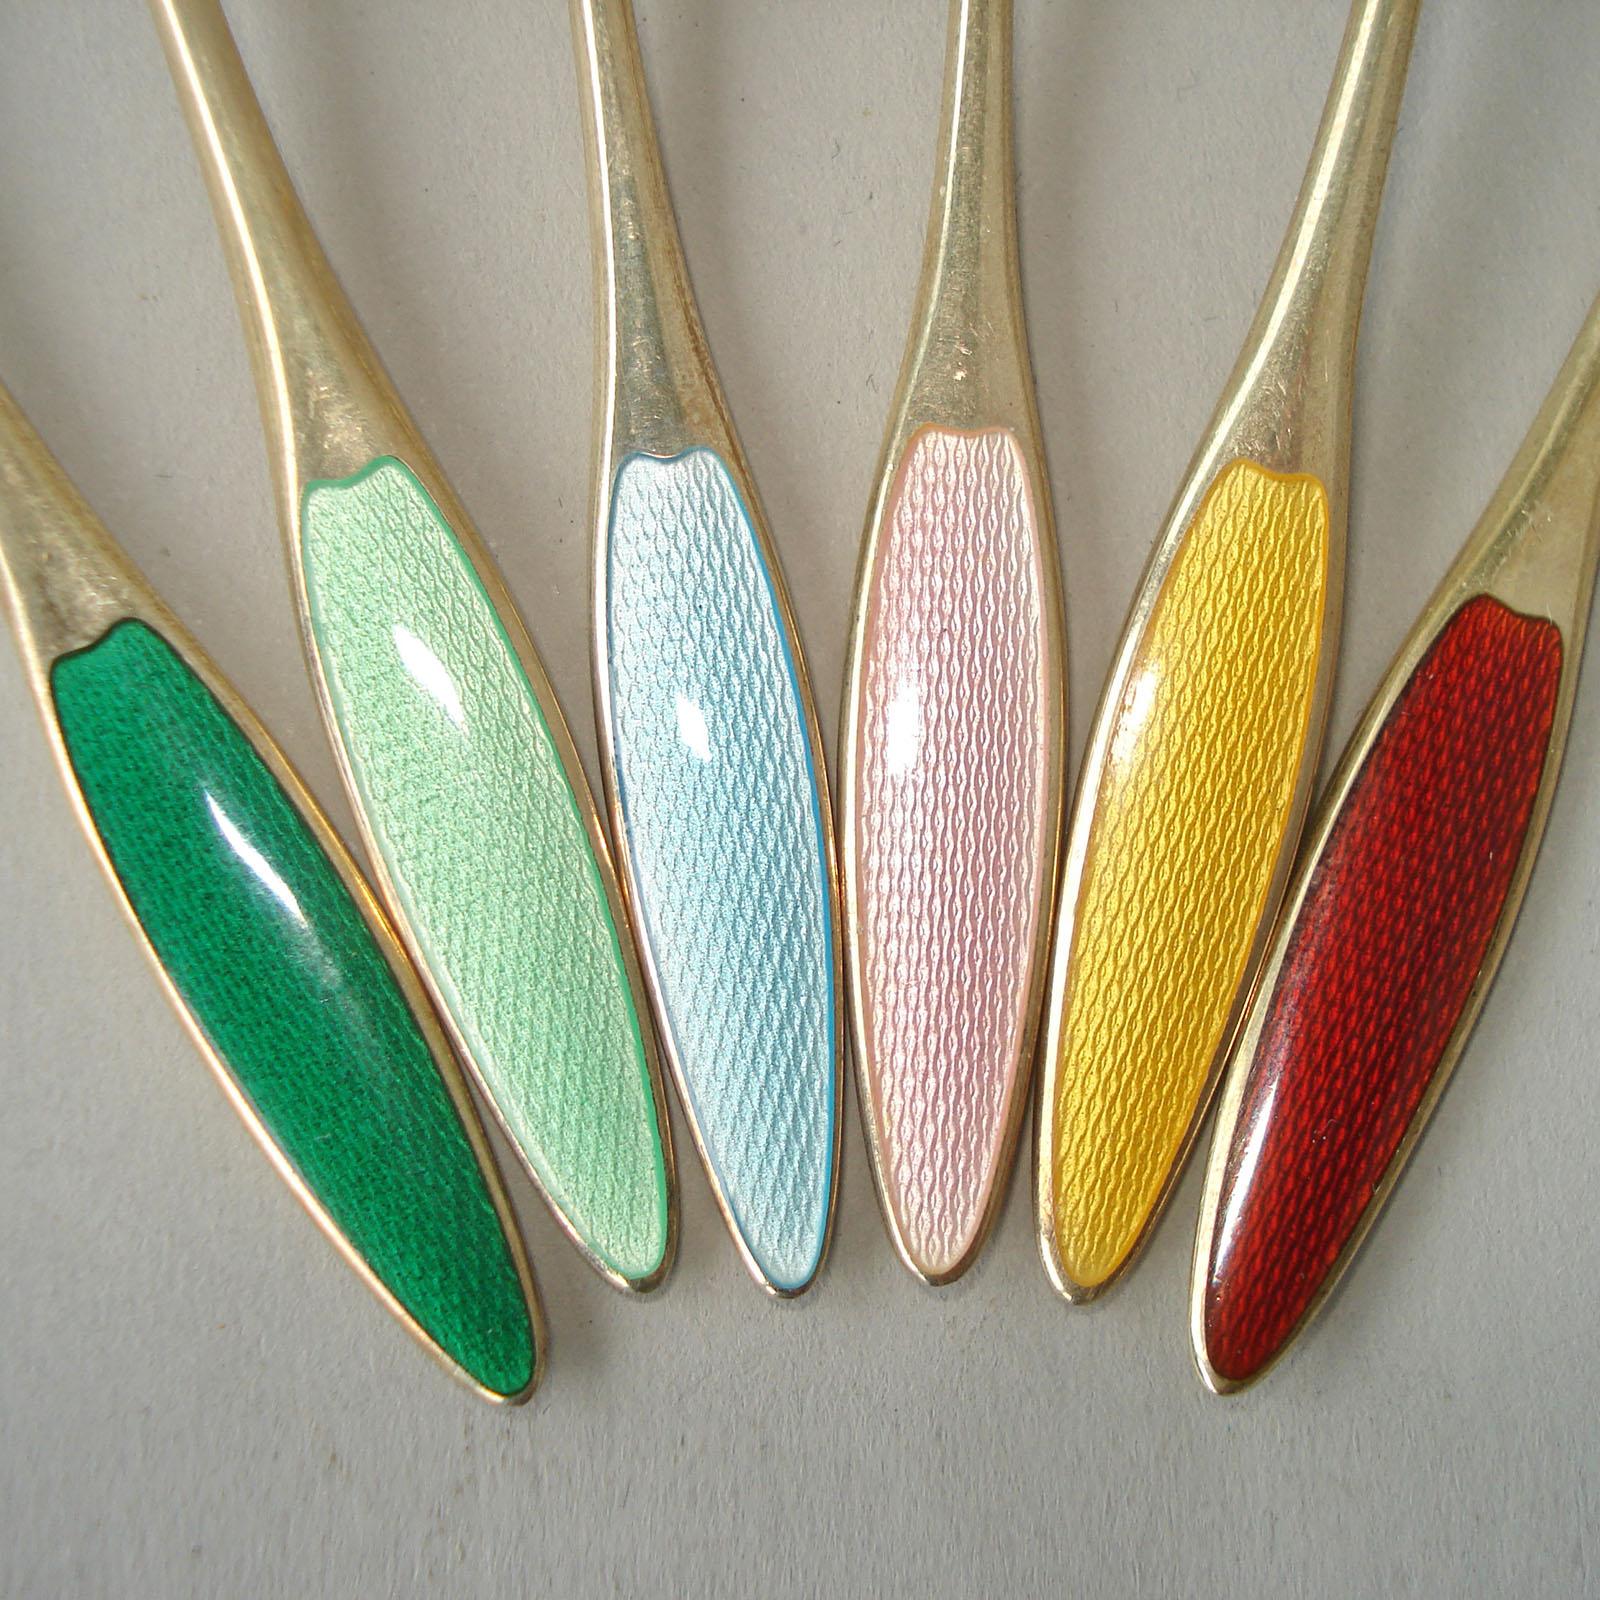 Mid-20th Century Set of Six Danish Spoons Sterling Silver with Polychrome Enamel, circa 1930